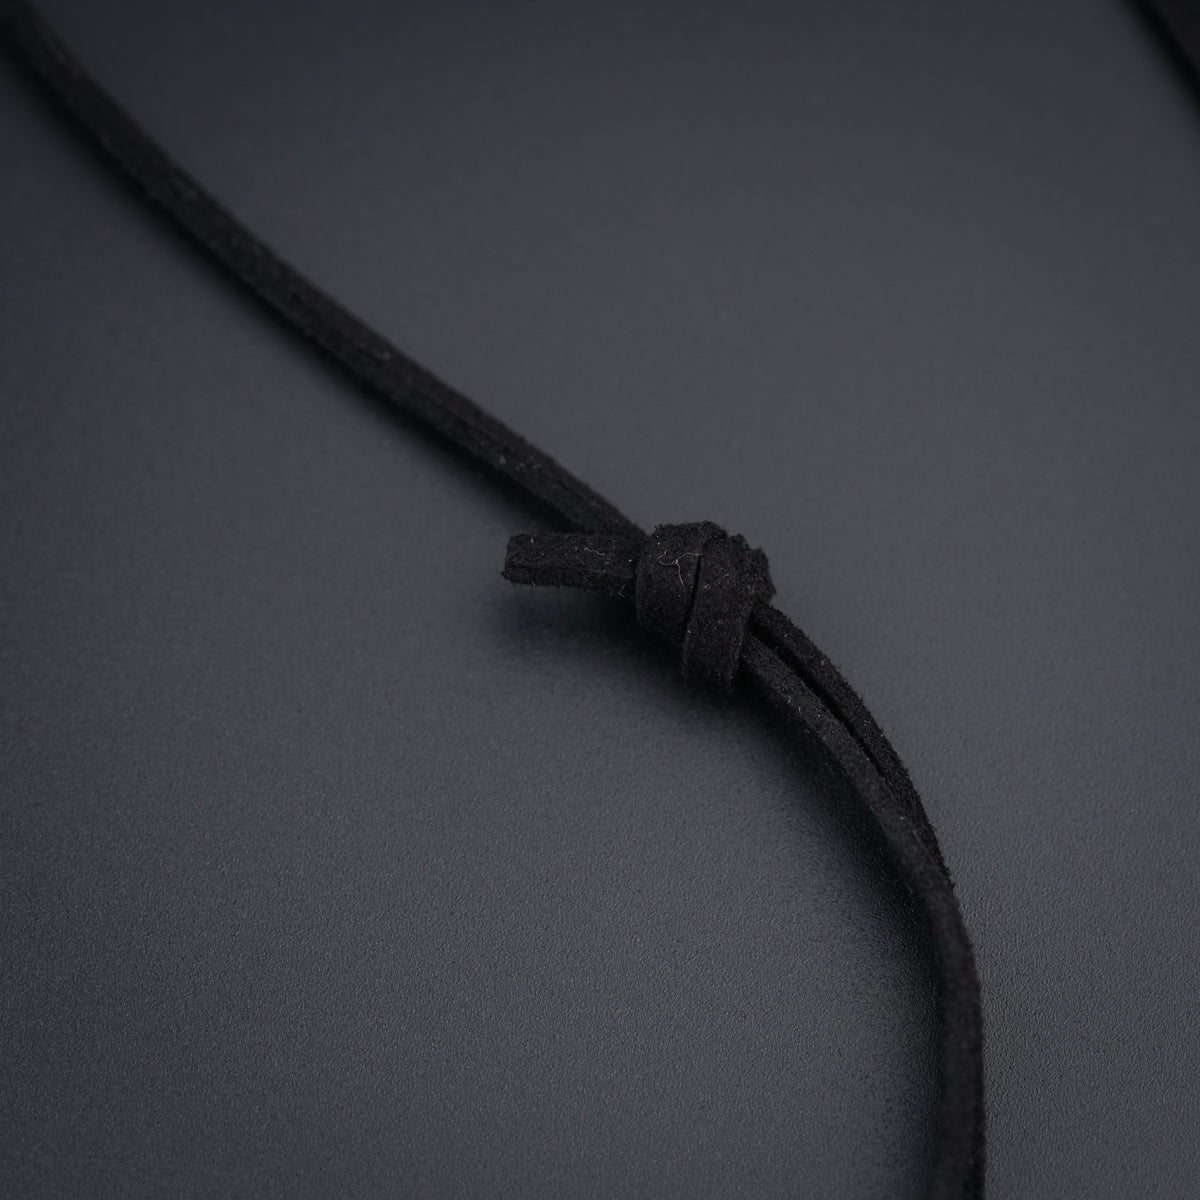 a close up of a black cord on a gray surface